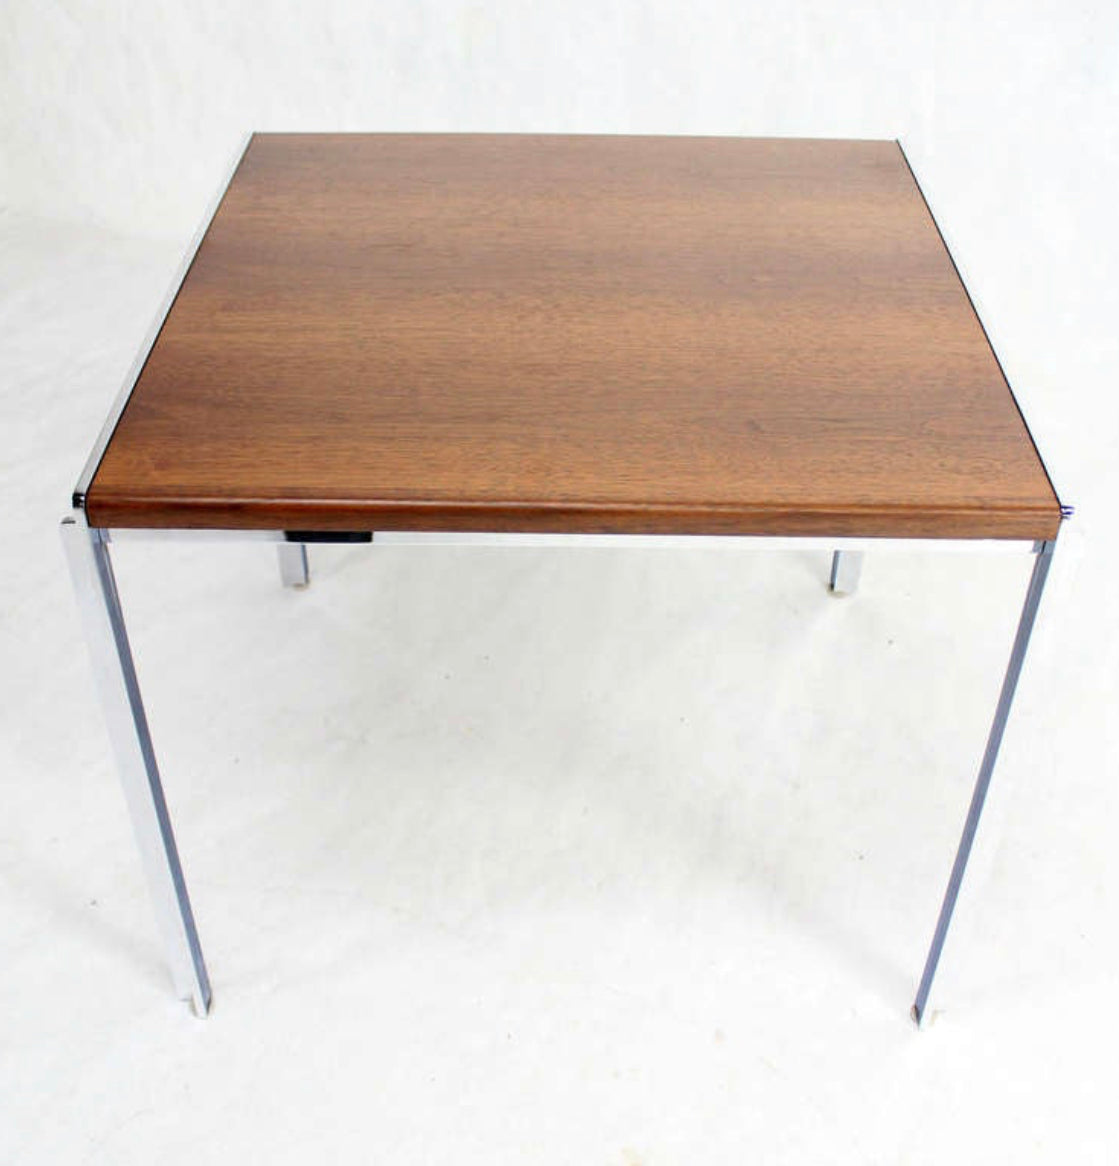 Stow Davis Large Accent or Nightside Tables (Priced Individually)